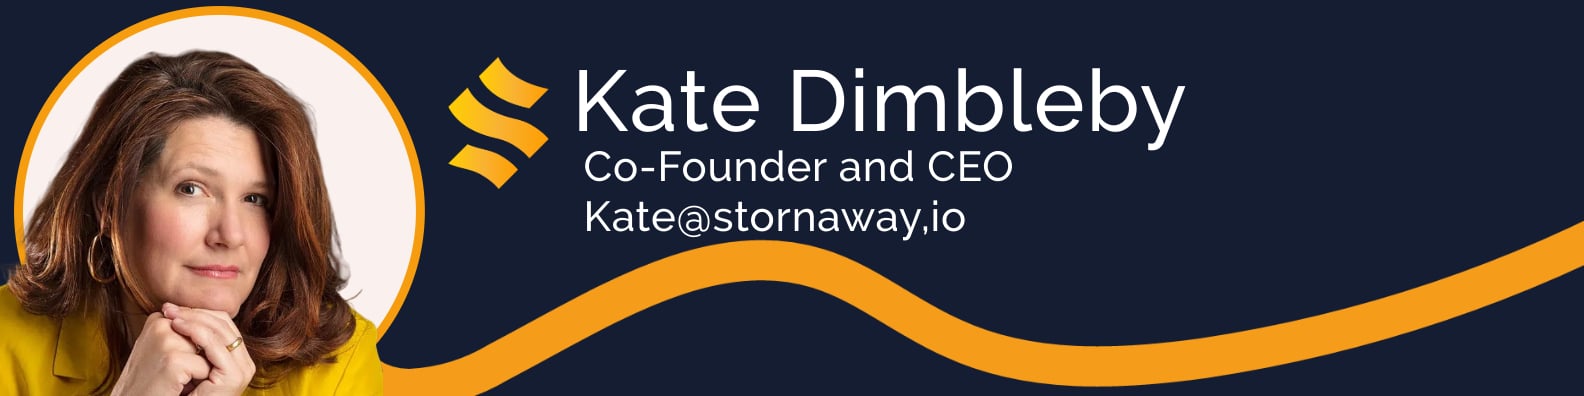 Kate Dimbleby - Stornaway.io CEO and Co-Founder - a blue background with a beige circle, in front of this is a headshot of Kate - white female with long brown hair and a yellow top on. An orange wavy line goes across the banner.